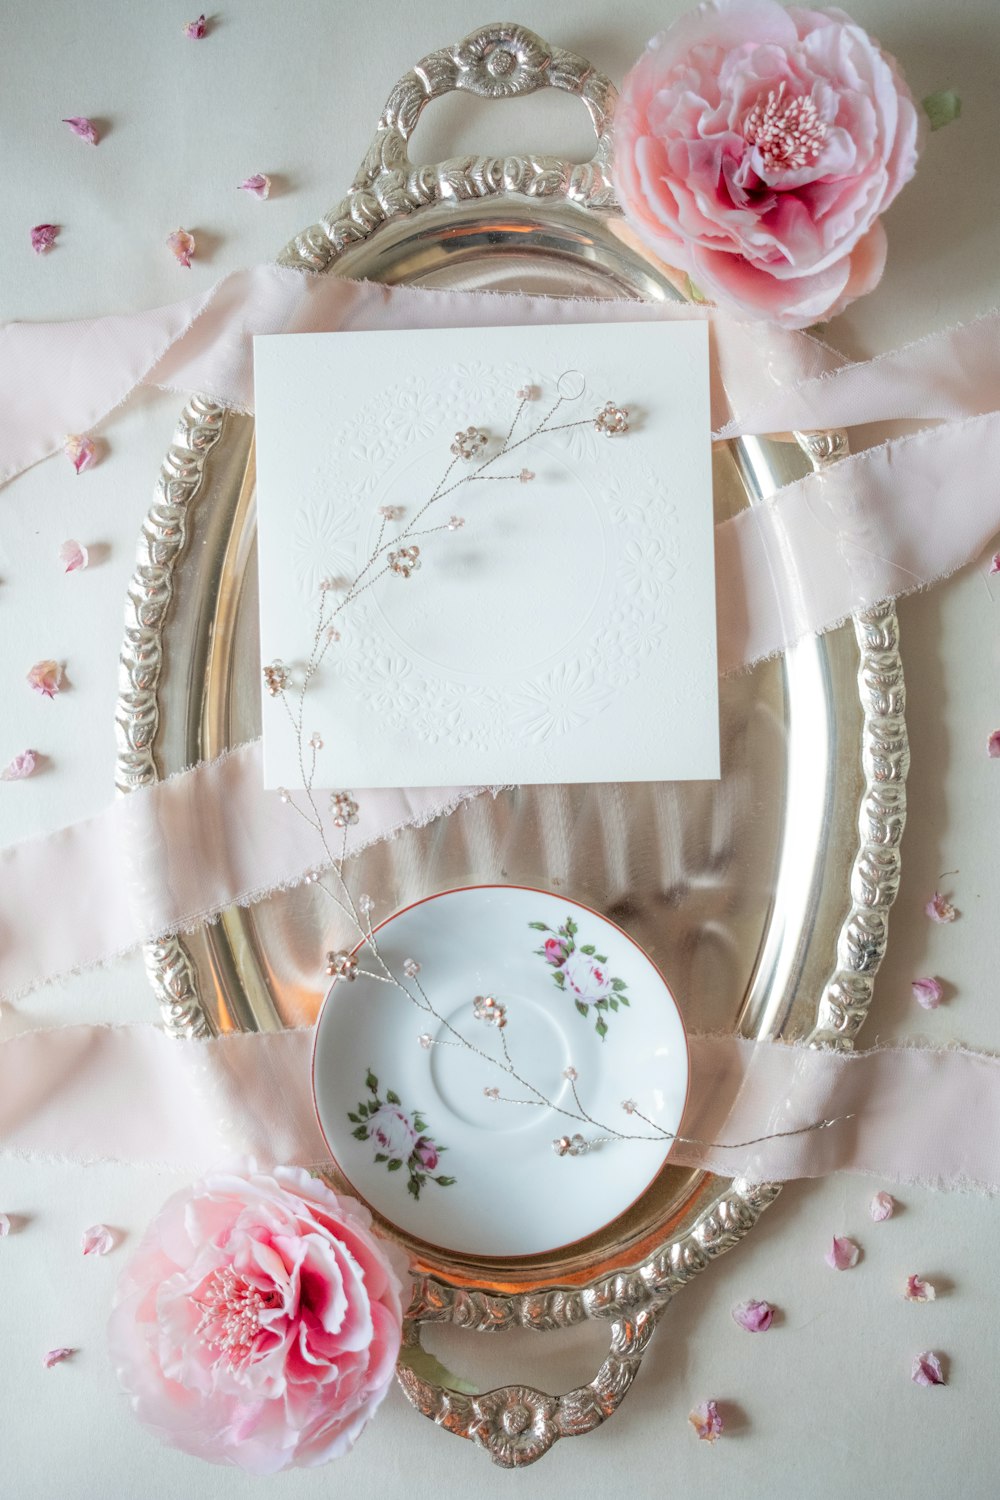 a plate with a card and some flowers on it